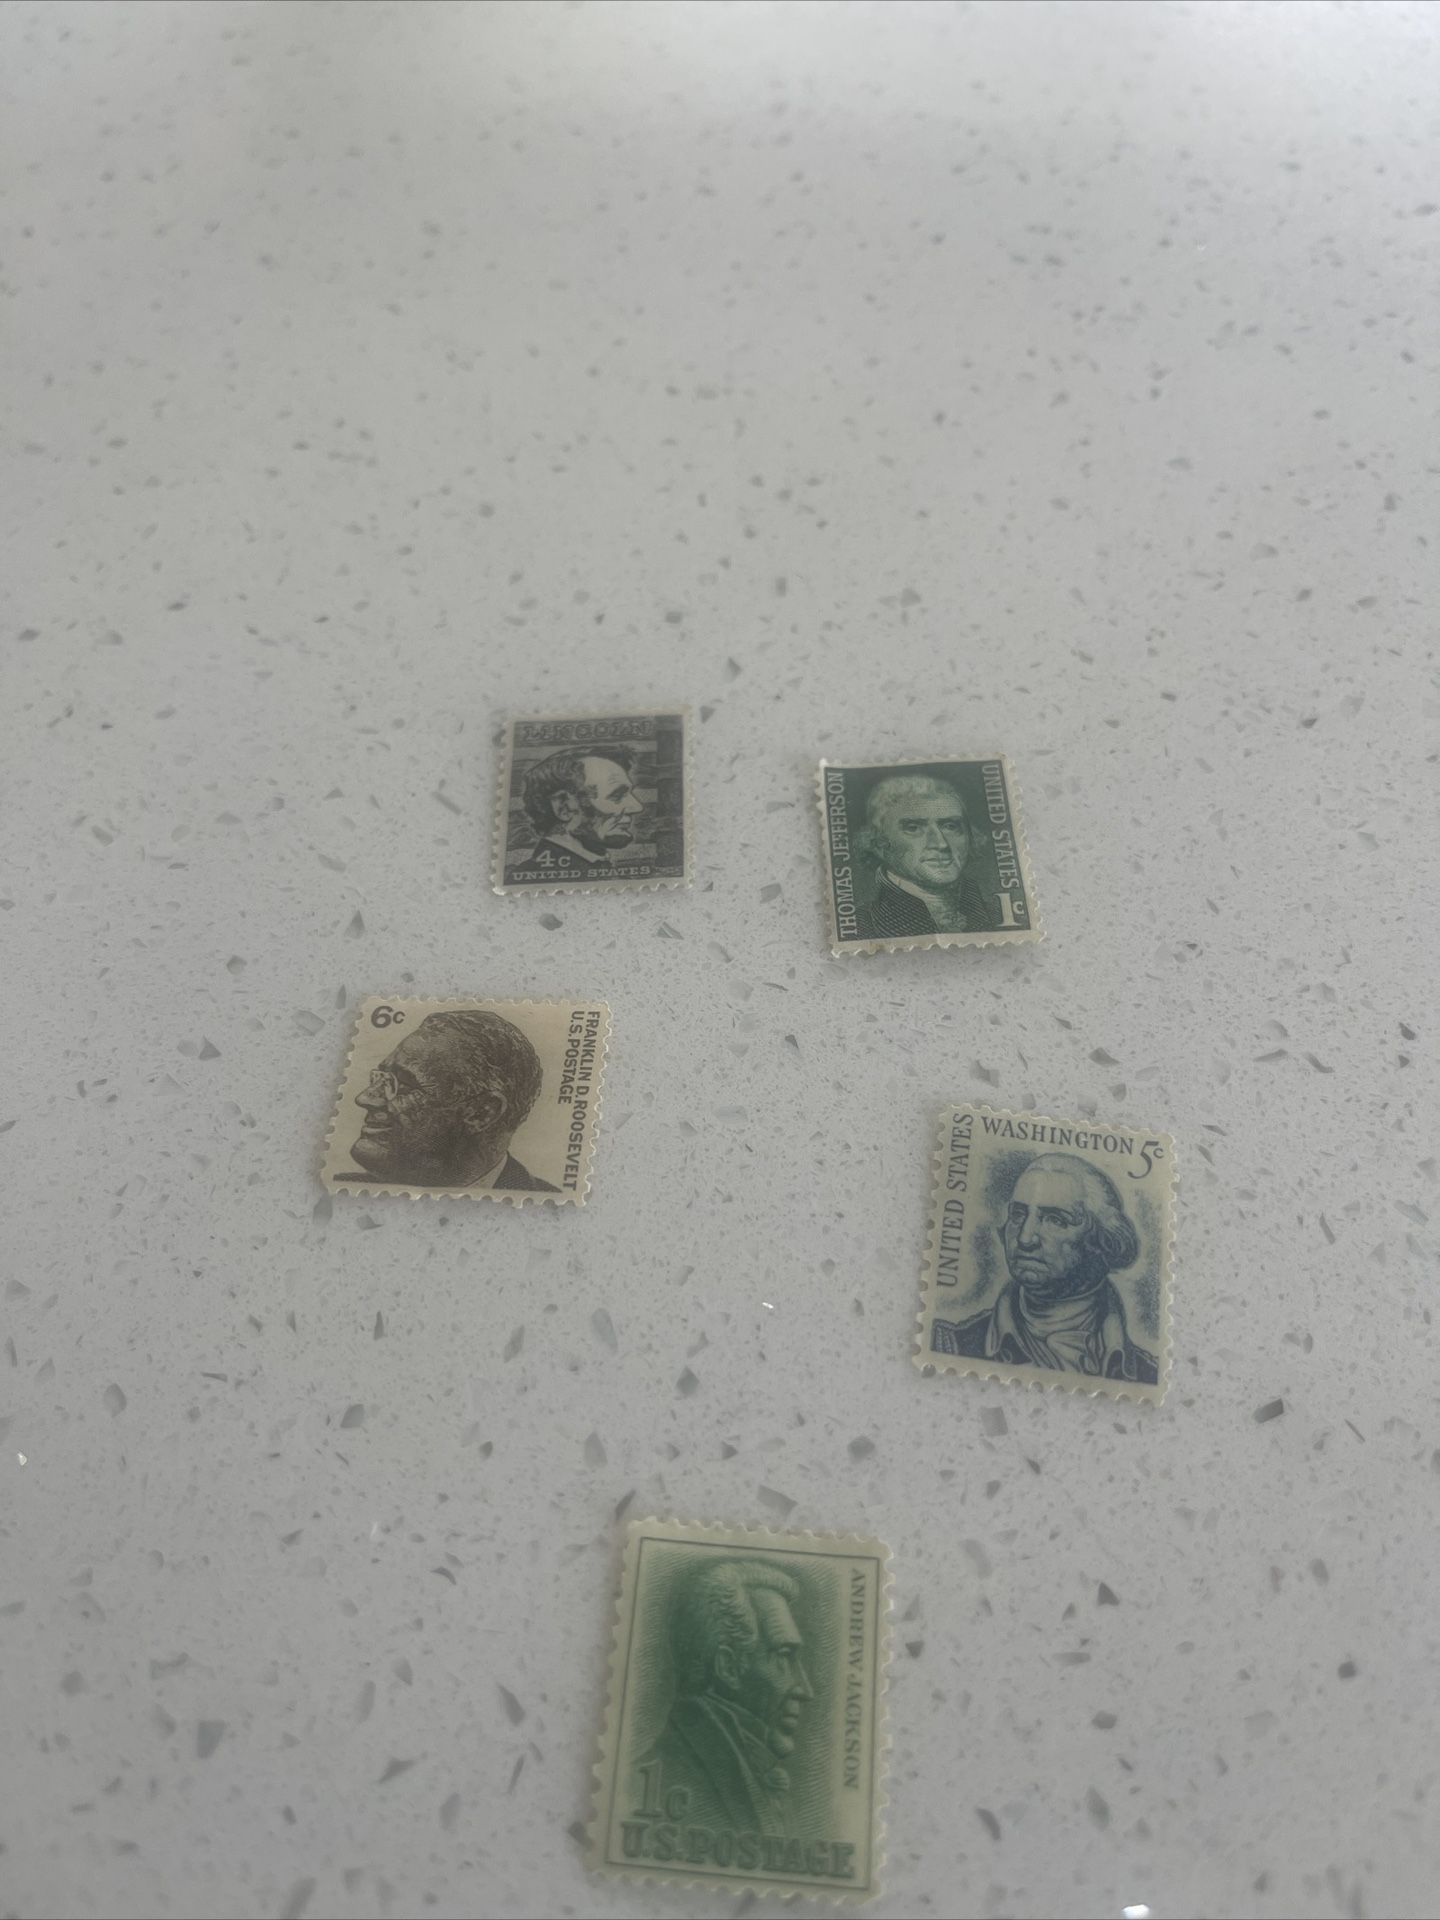 Rare Presidential Stamps